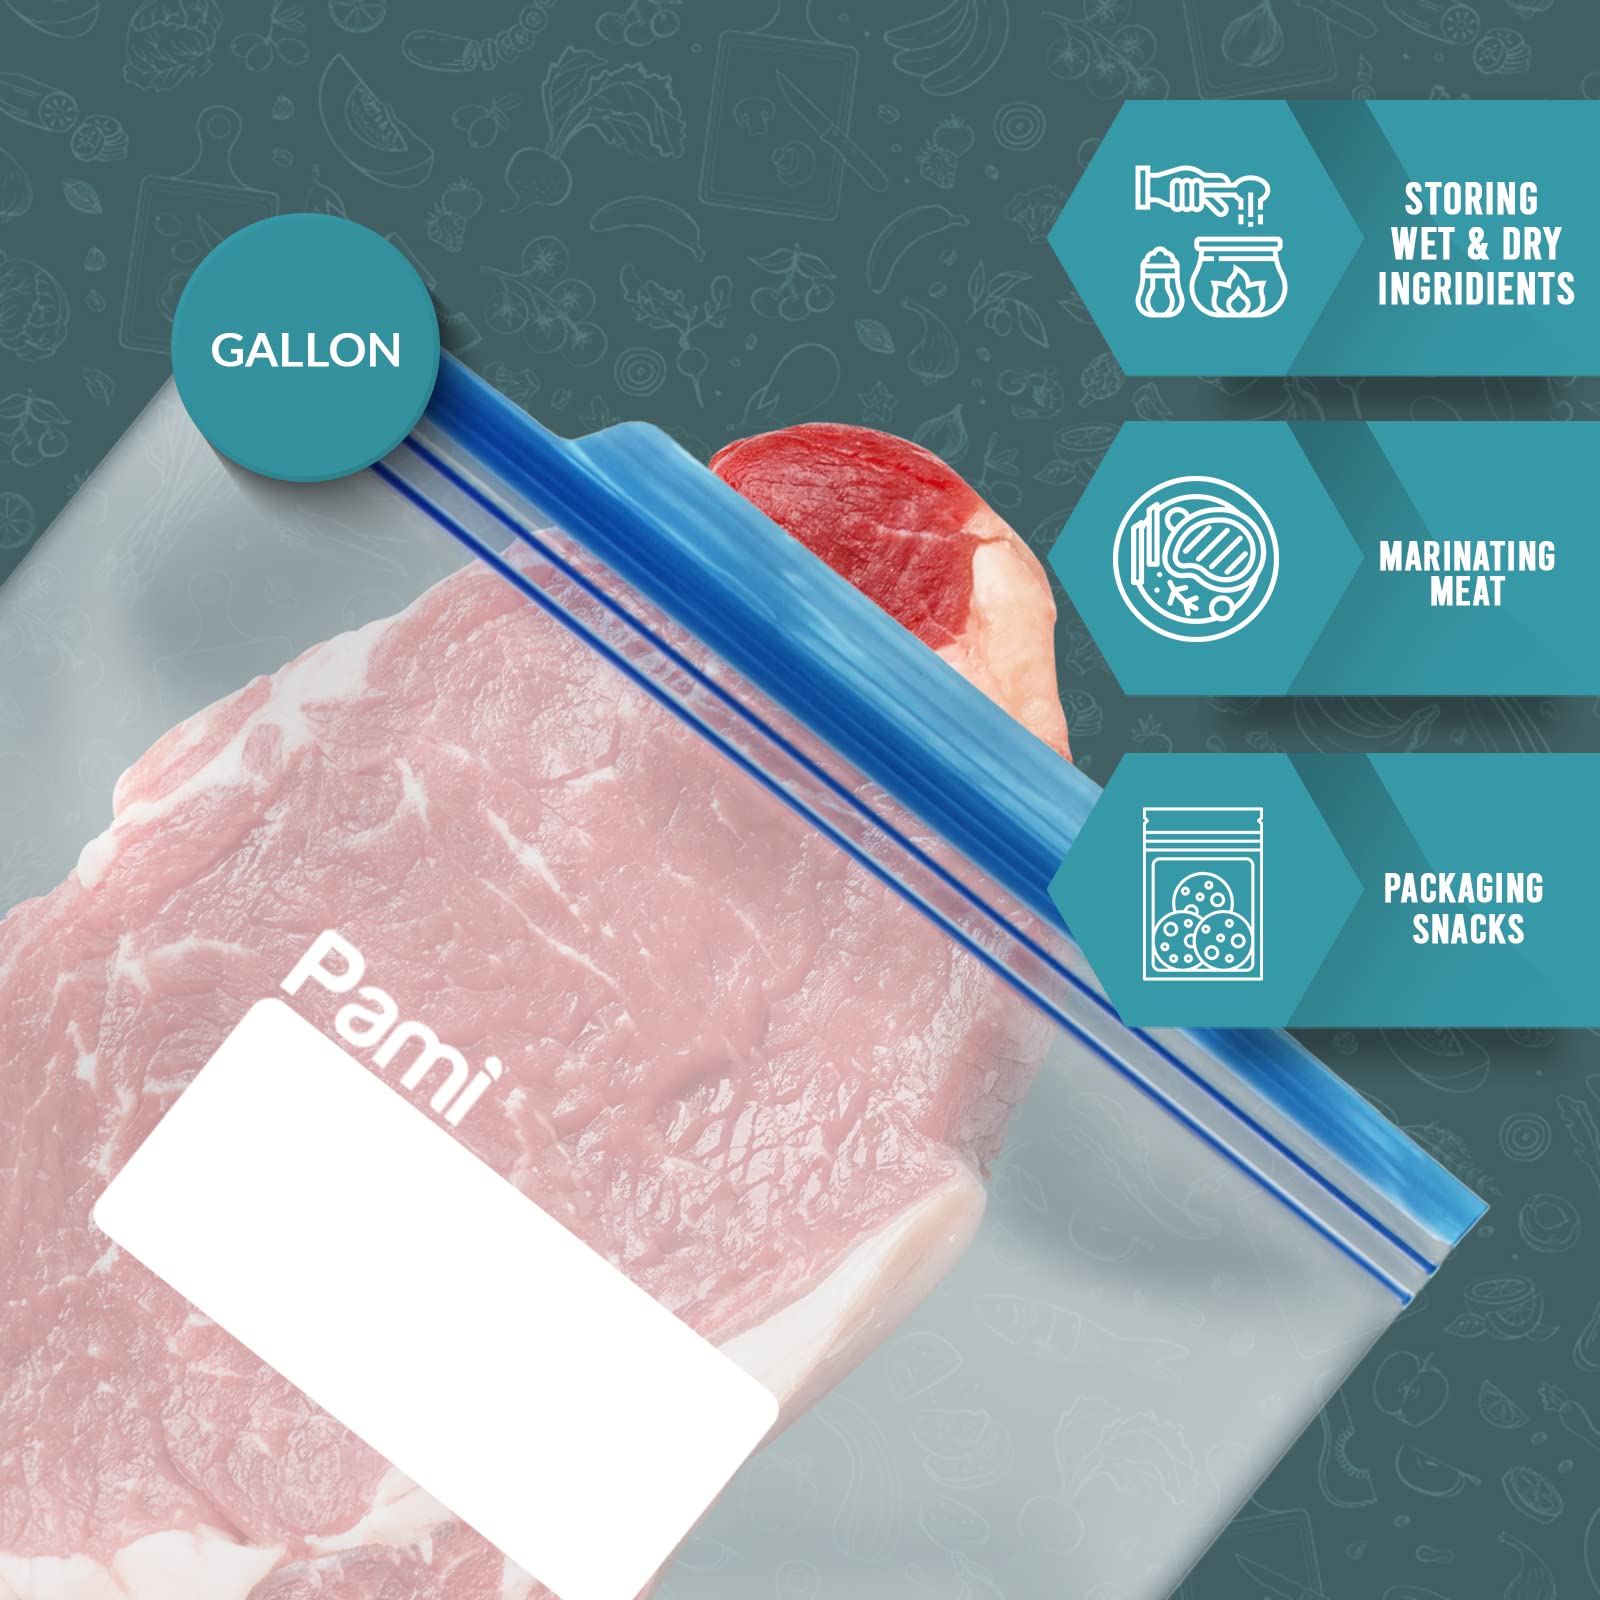 PAMI Freezer Zipper Gallon Bags [60 Pieces] - Leakproof Food Storage Freshness-Lock Bags With Expandable Bottom- Food-Safe Slider Zipper Bags